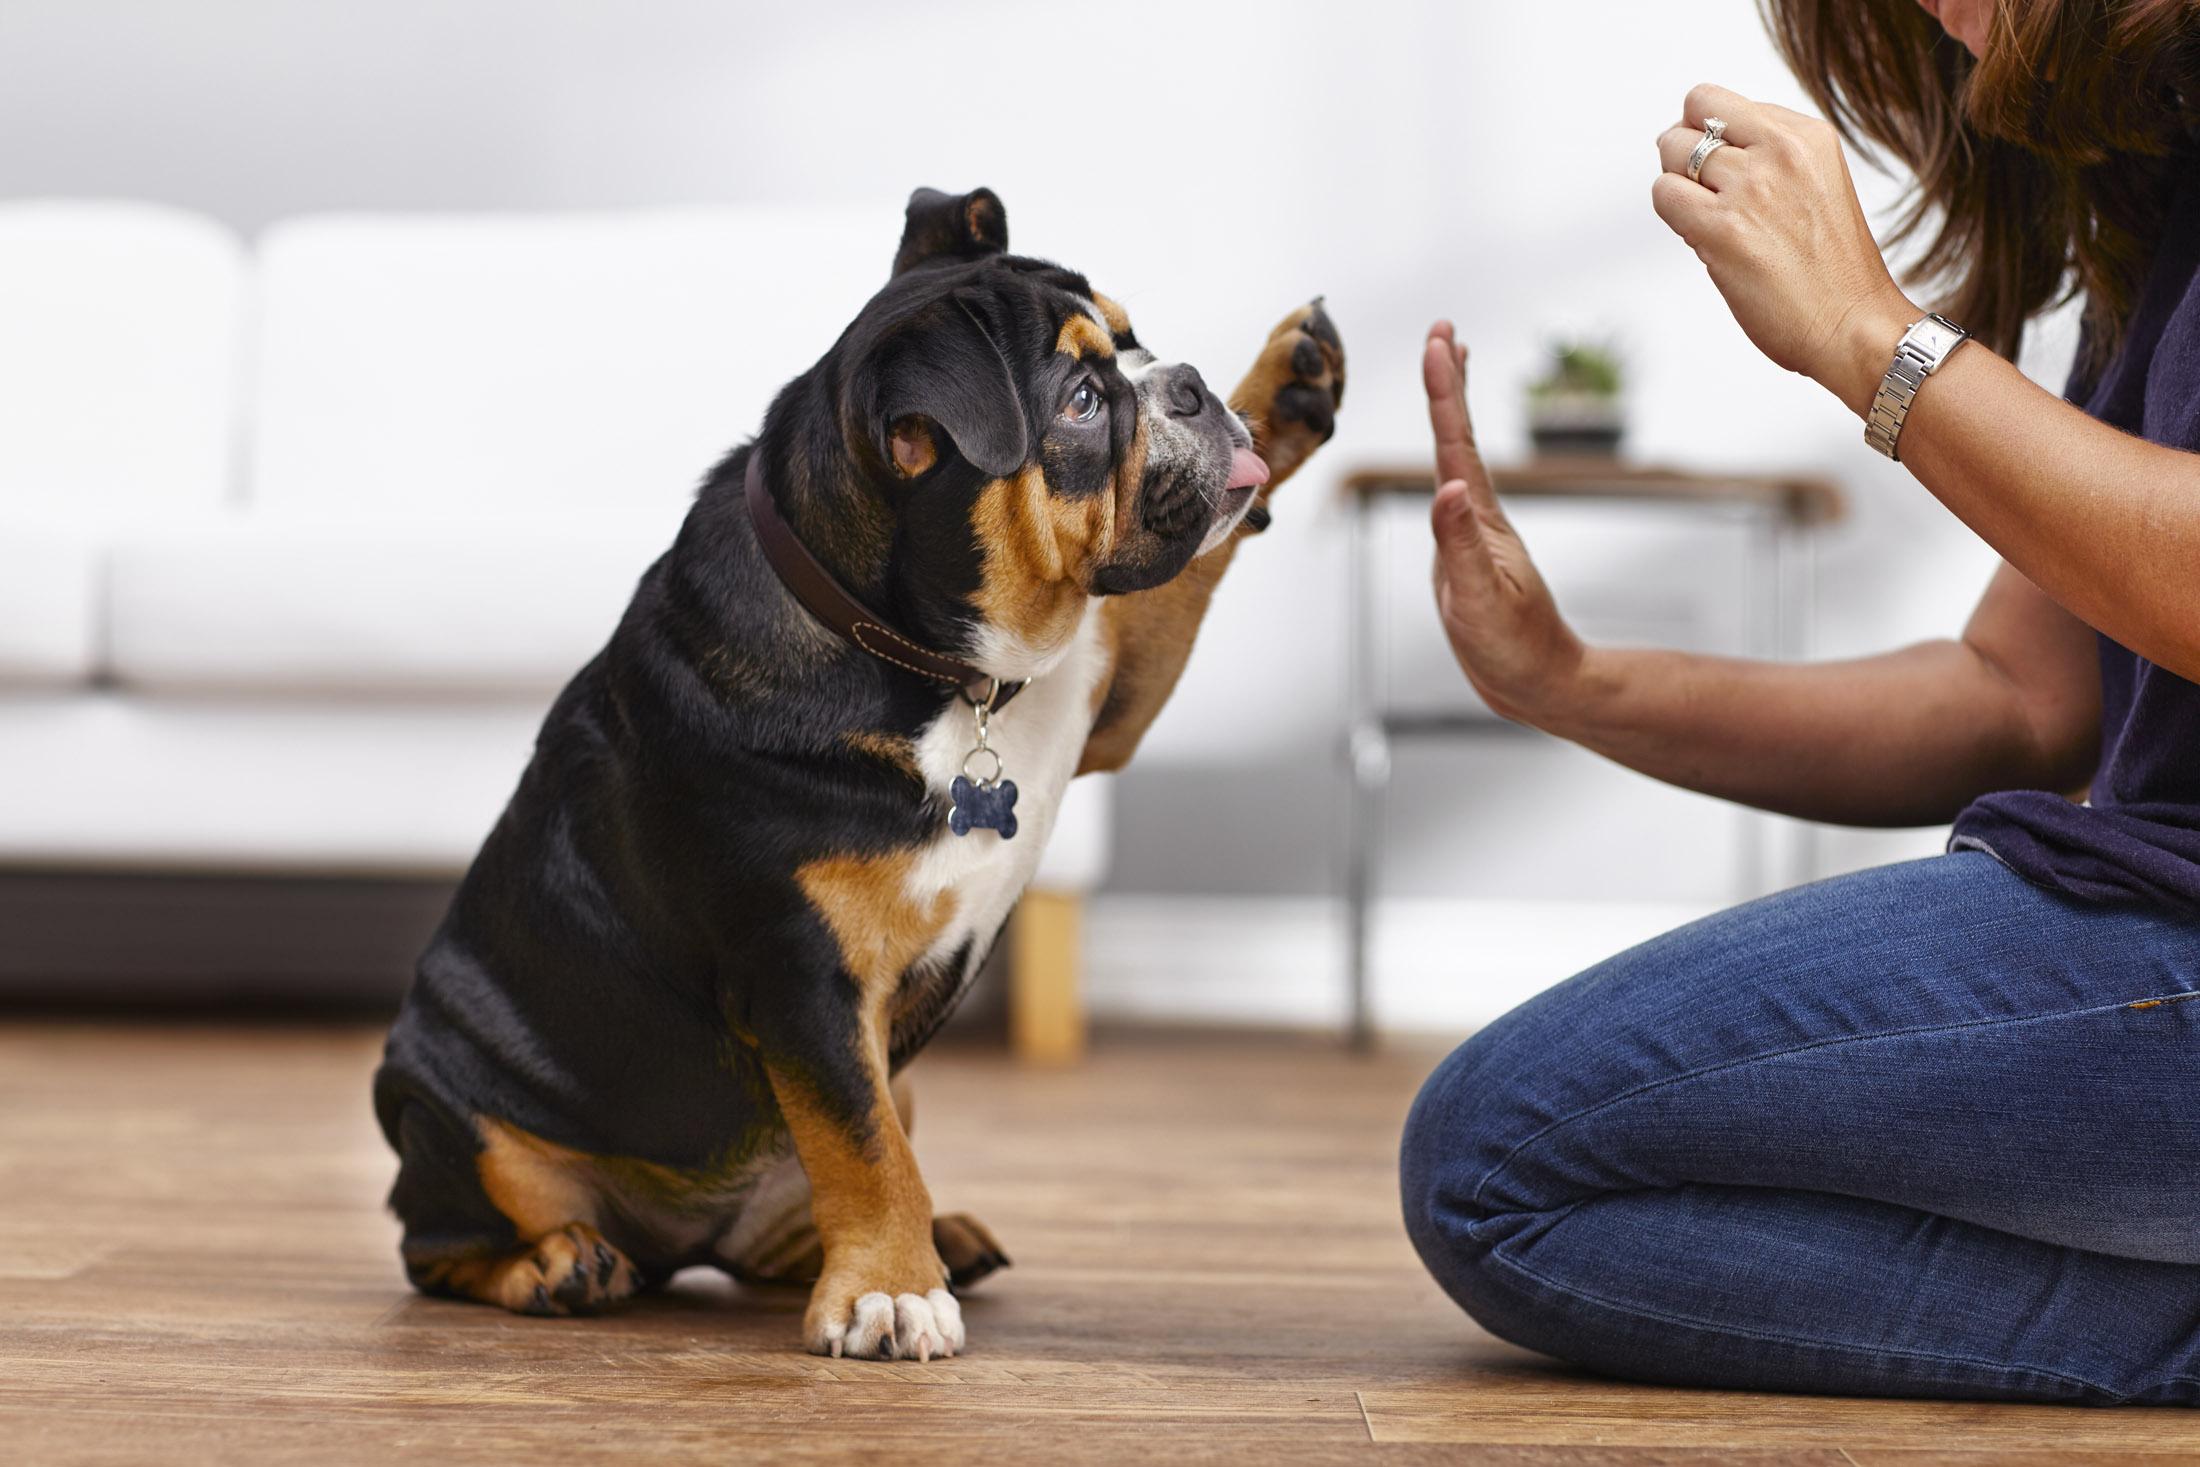 Health & Wellness Goals for Your Dog in 2020